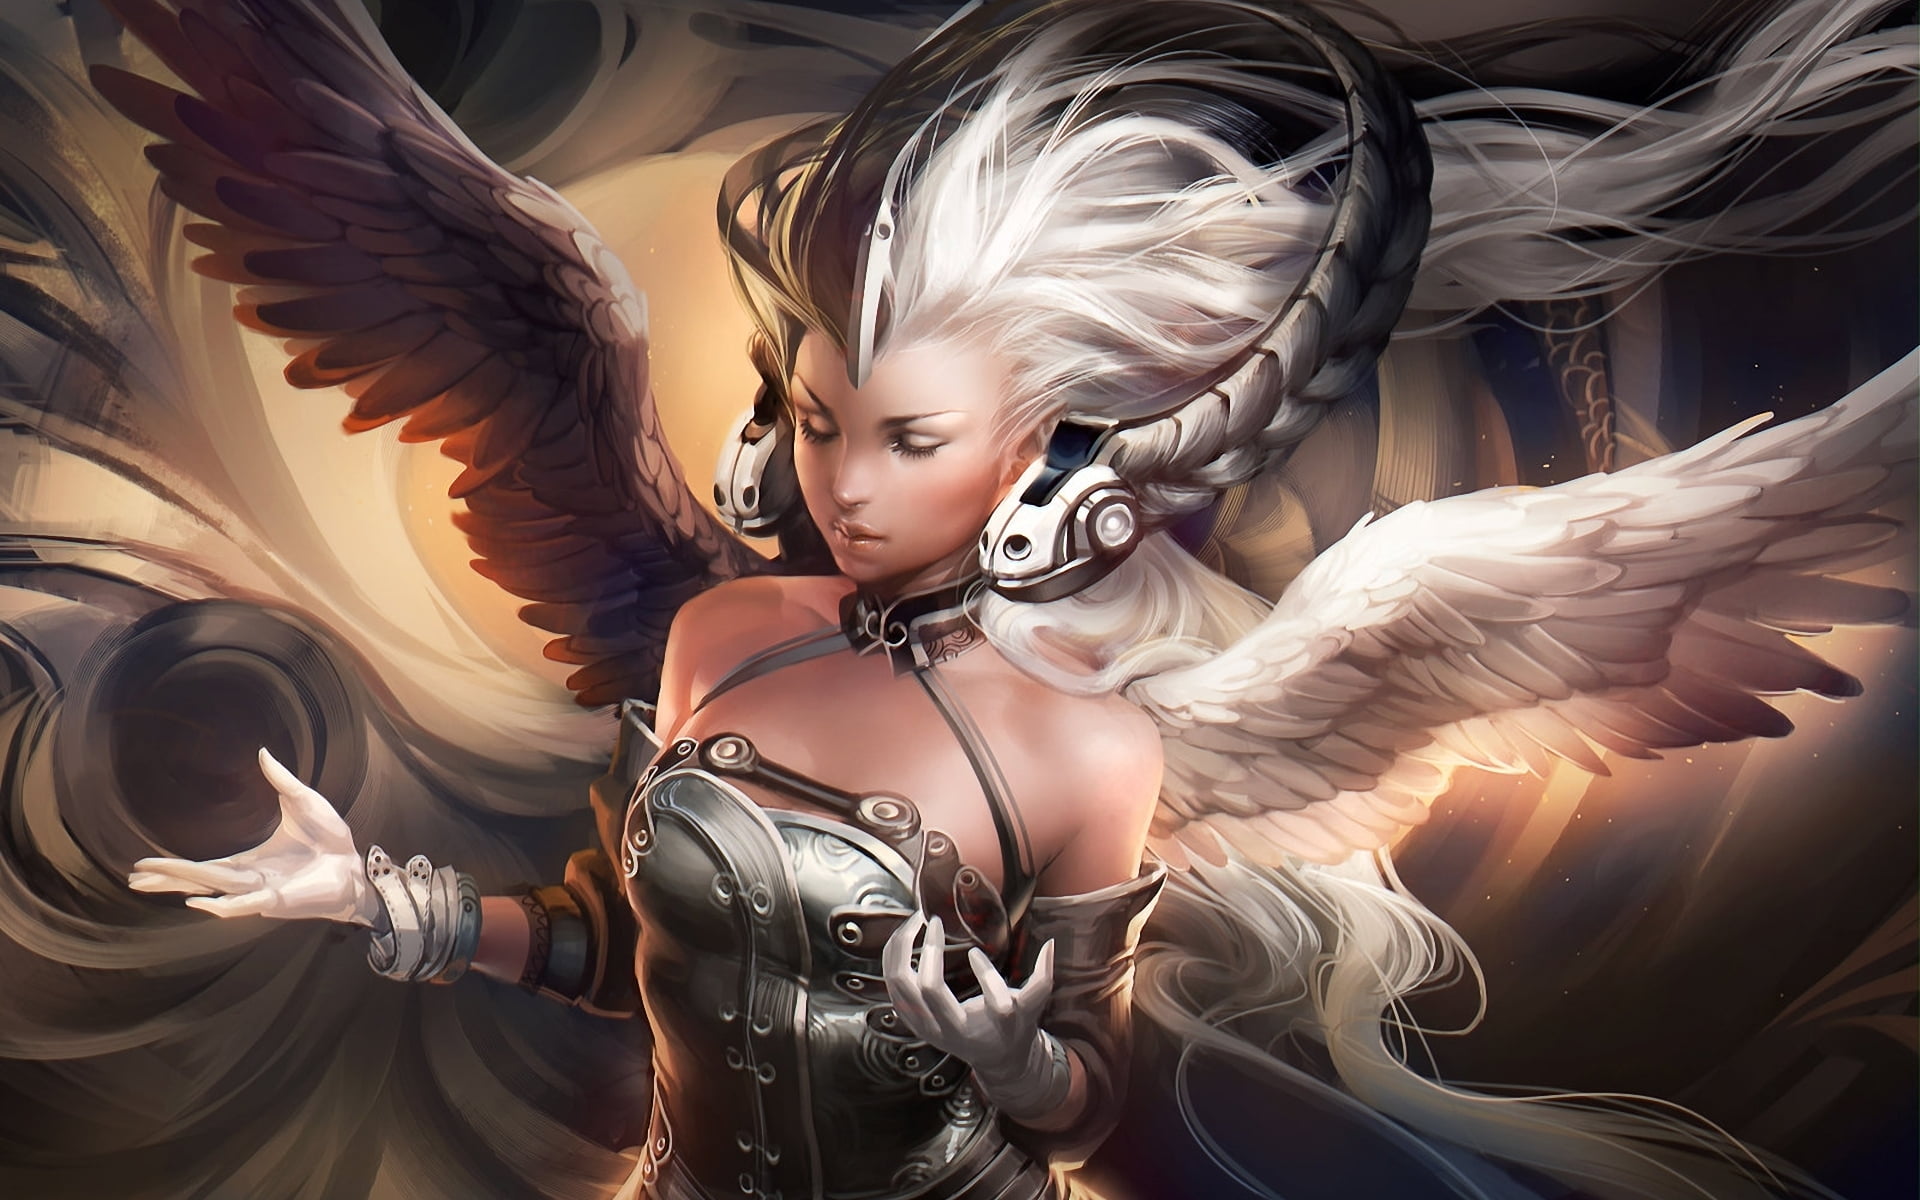 black and white haired woman with wings illustration